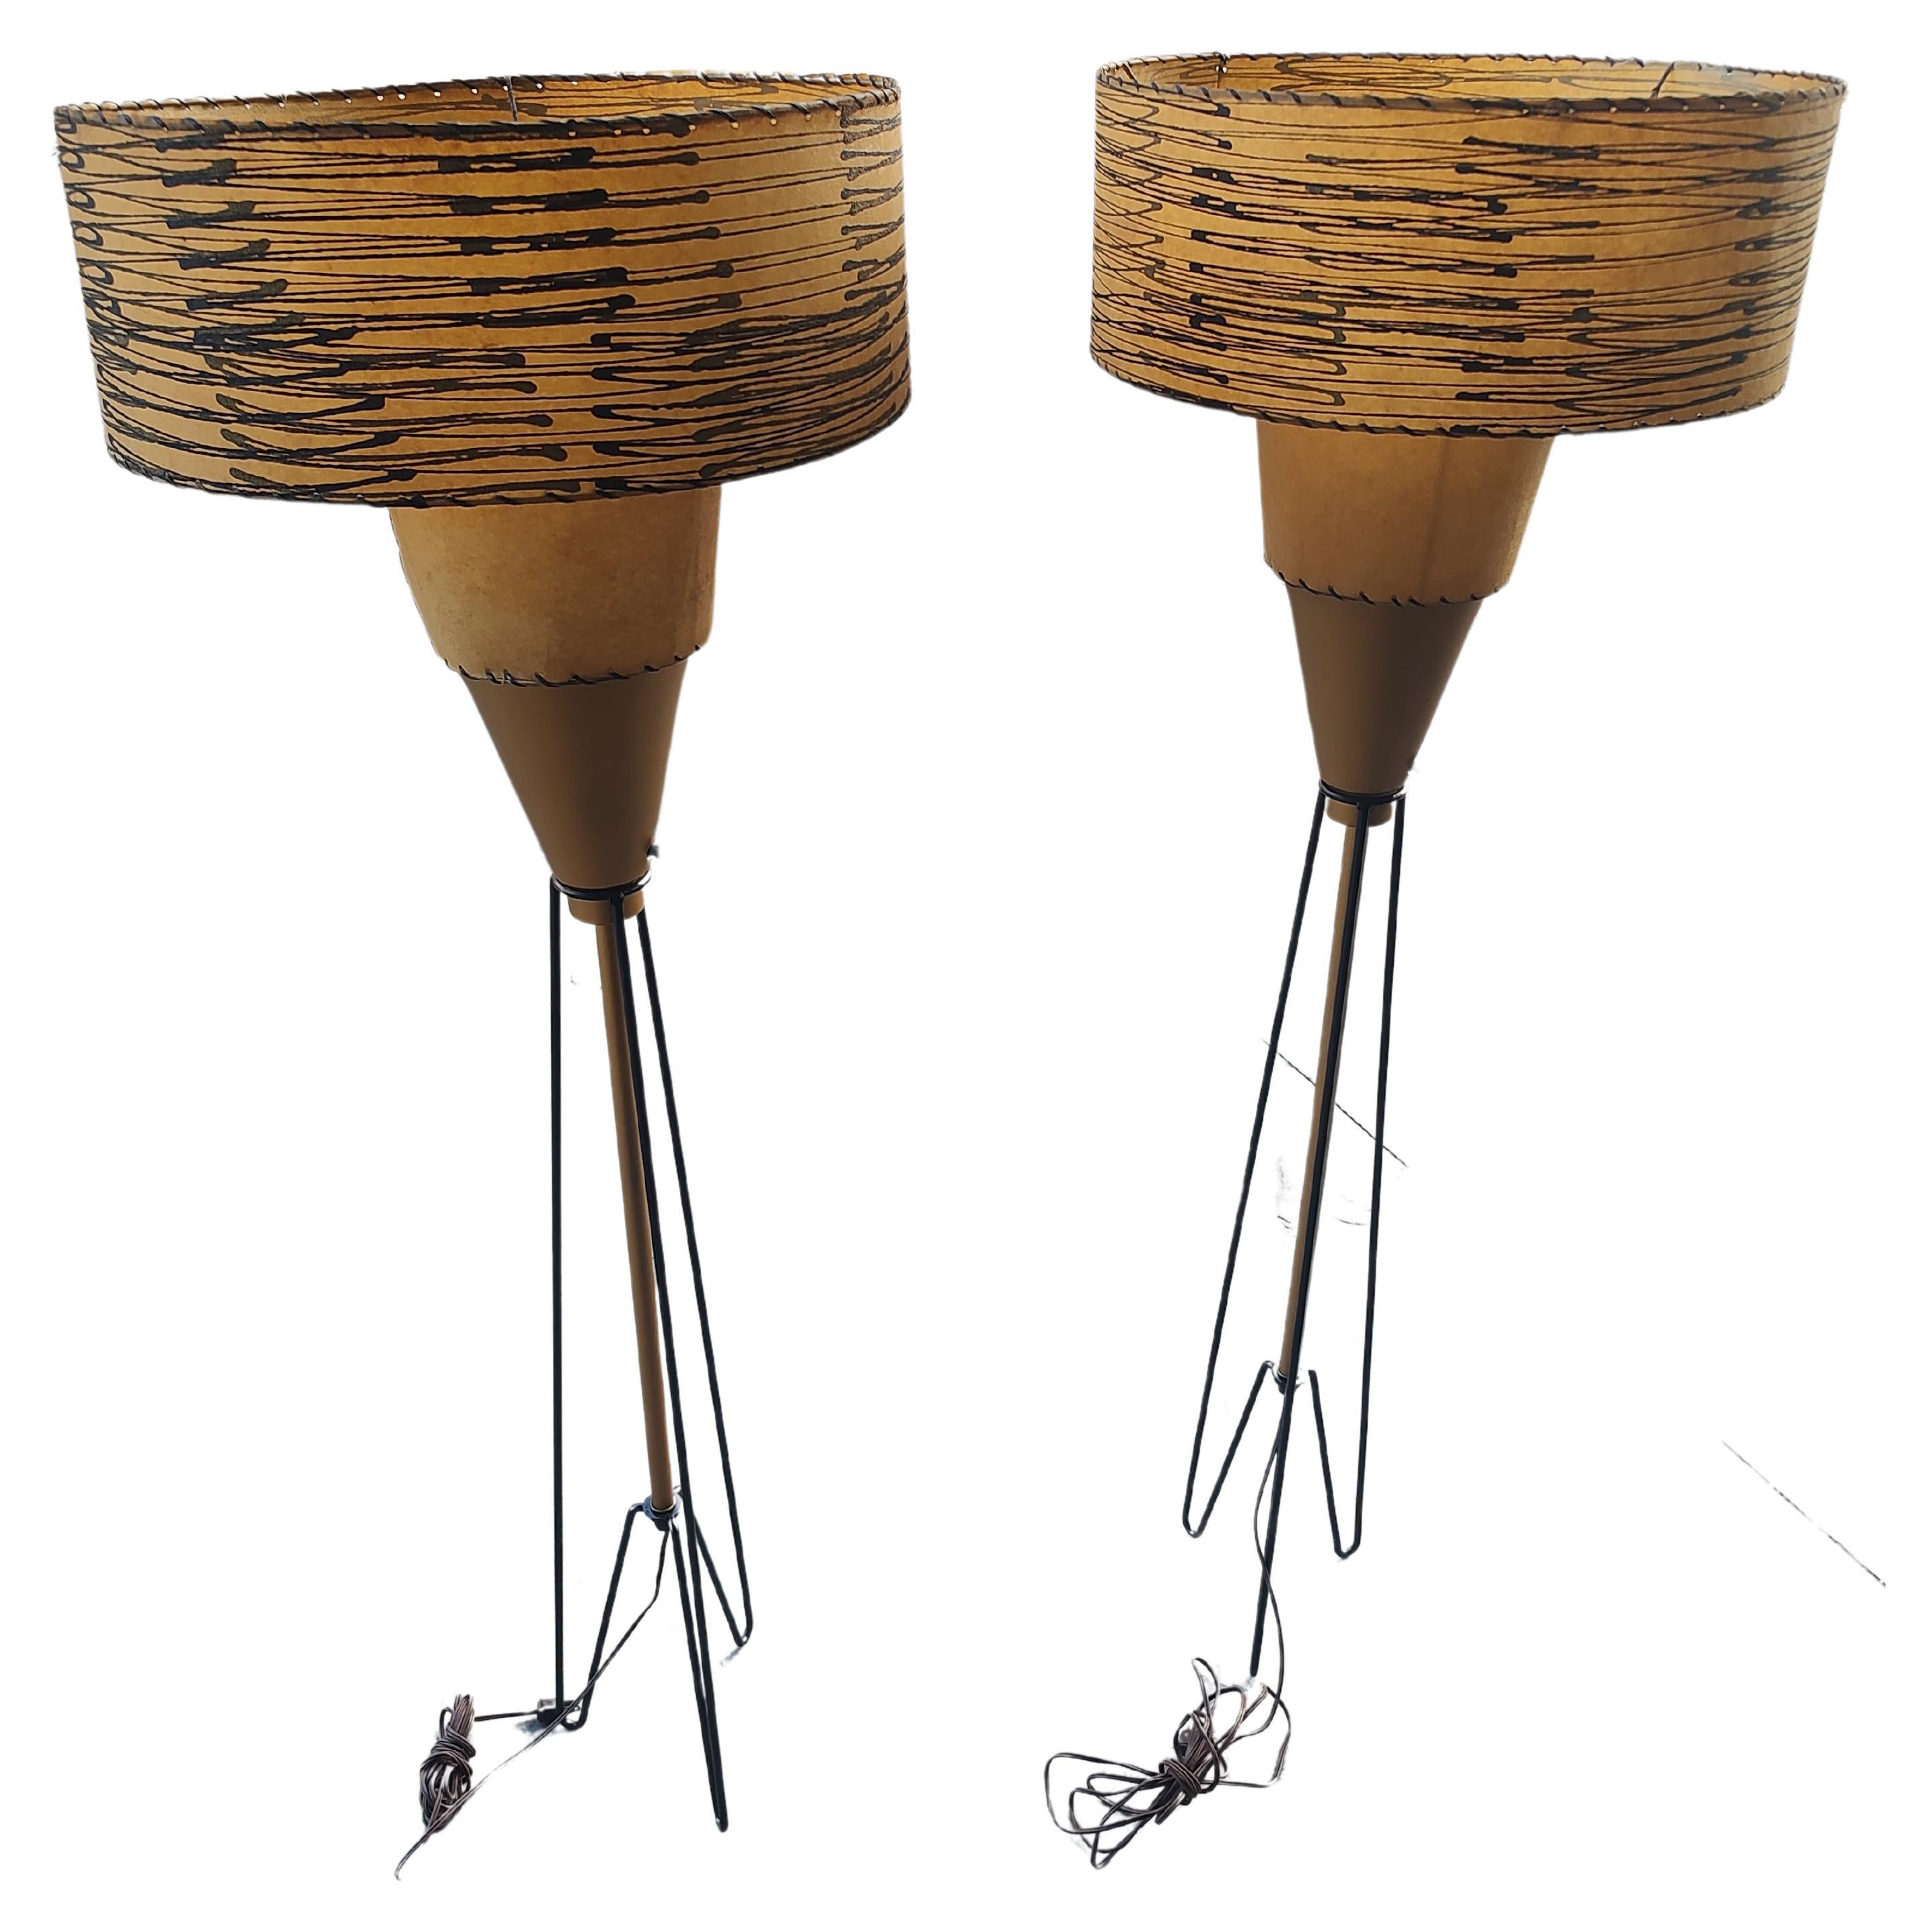 Steel Pair of Mid Century Modern C1950s Floor Lamps Atomic Towers by Majestic Lamp Co. For Sale